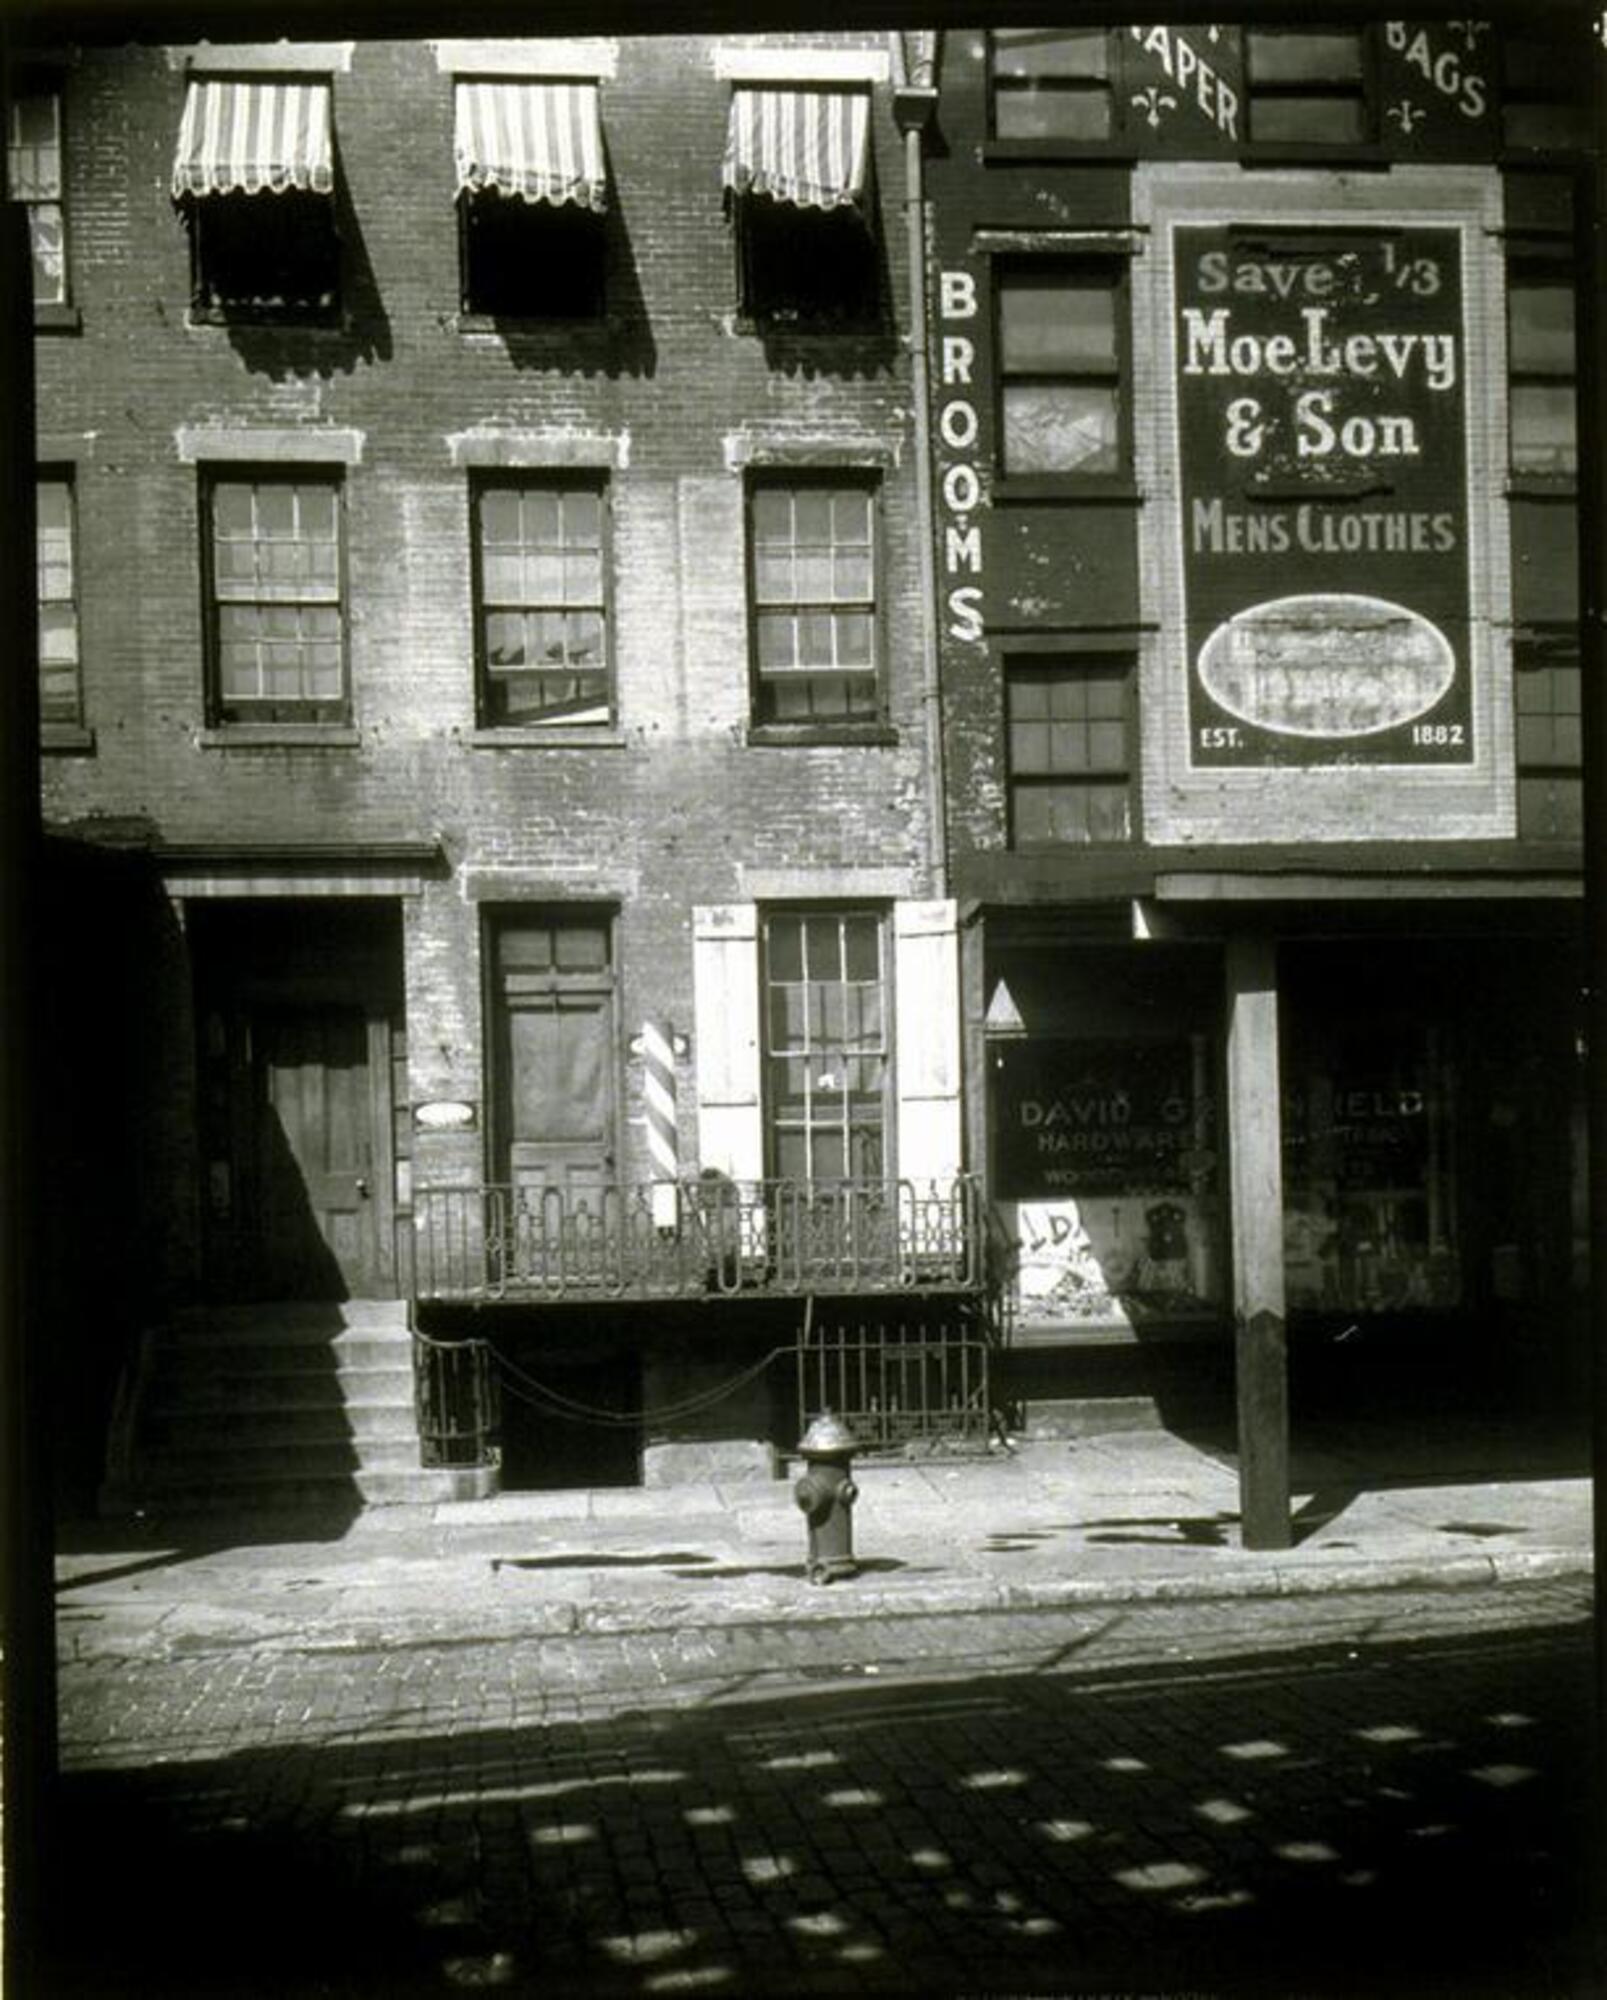 View of an empty street in front of a men's clothing store.